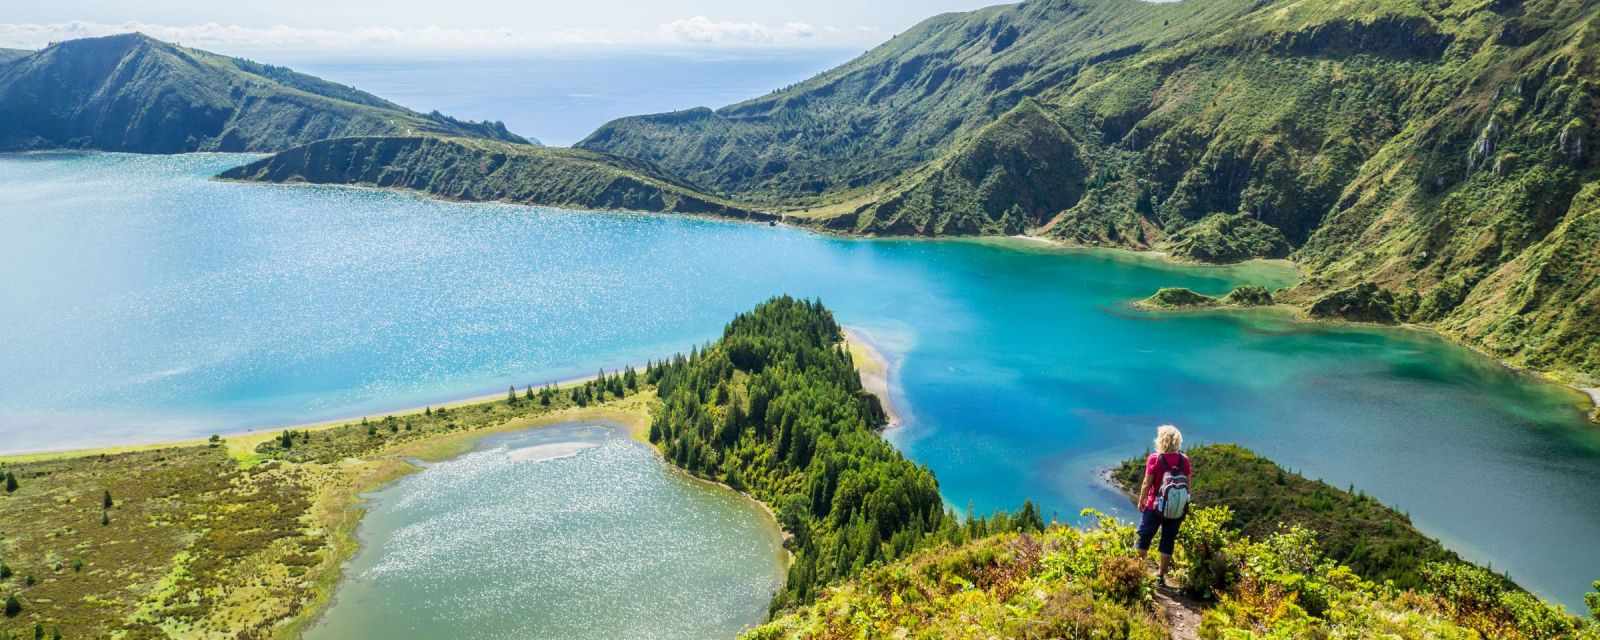 Lagoa do Fogo – Viewpoints and Hikes at Fogo Lake in Sao Miguel - Azores